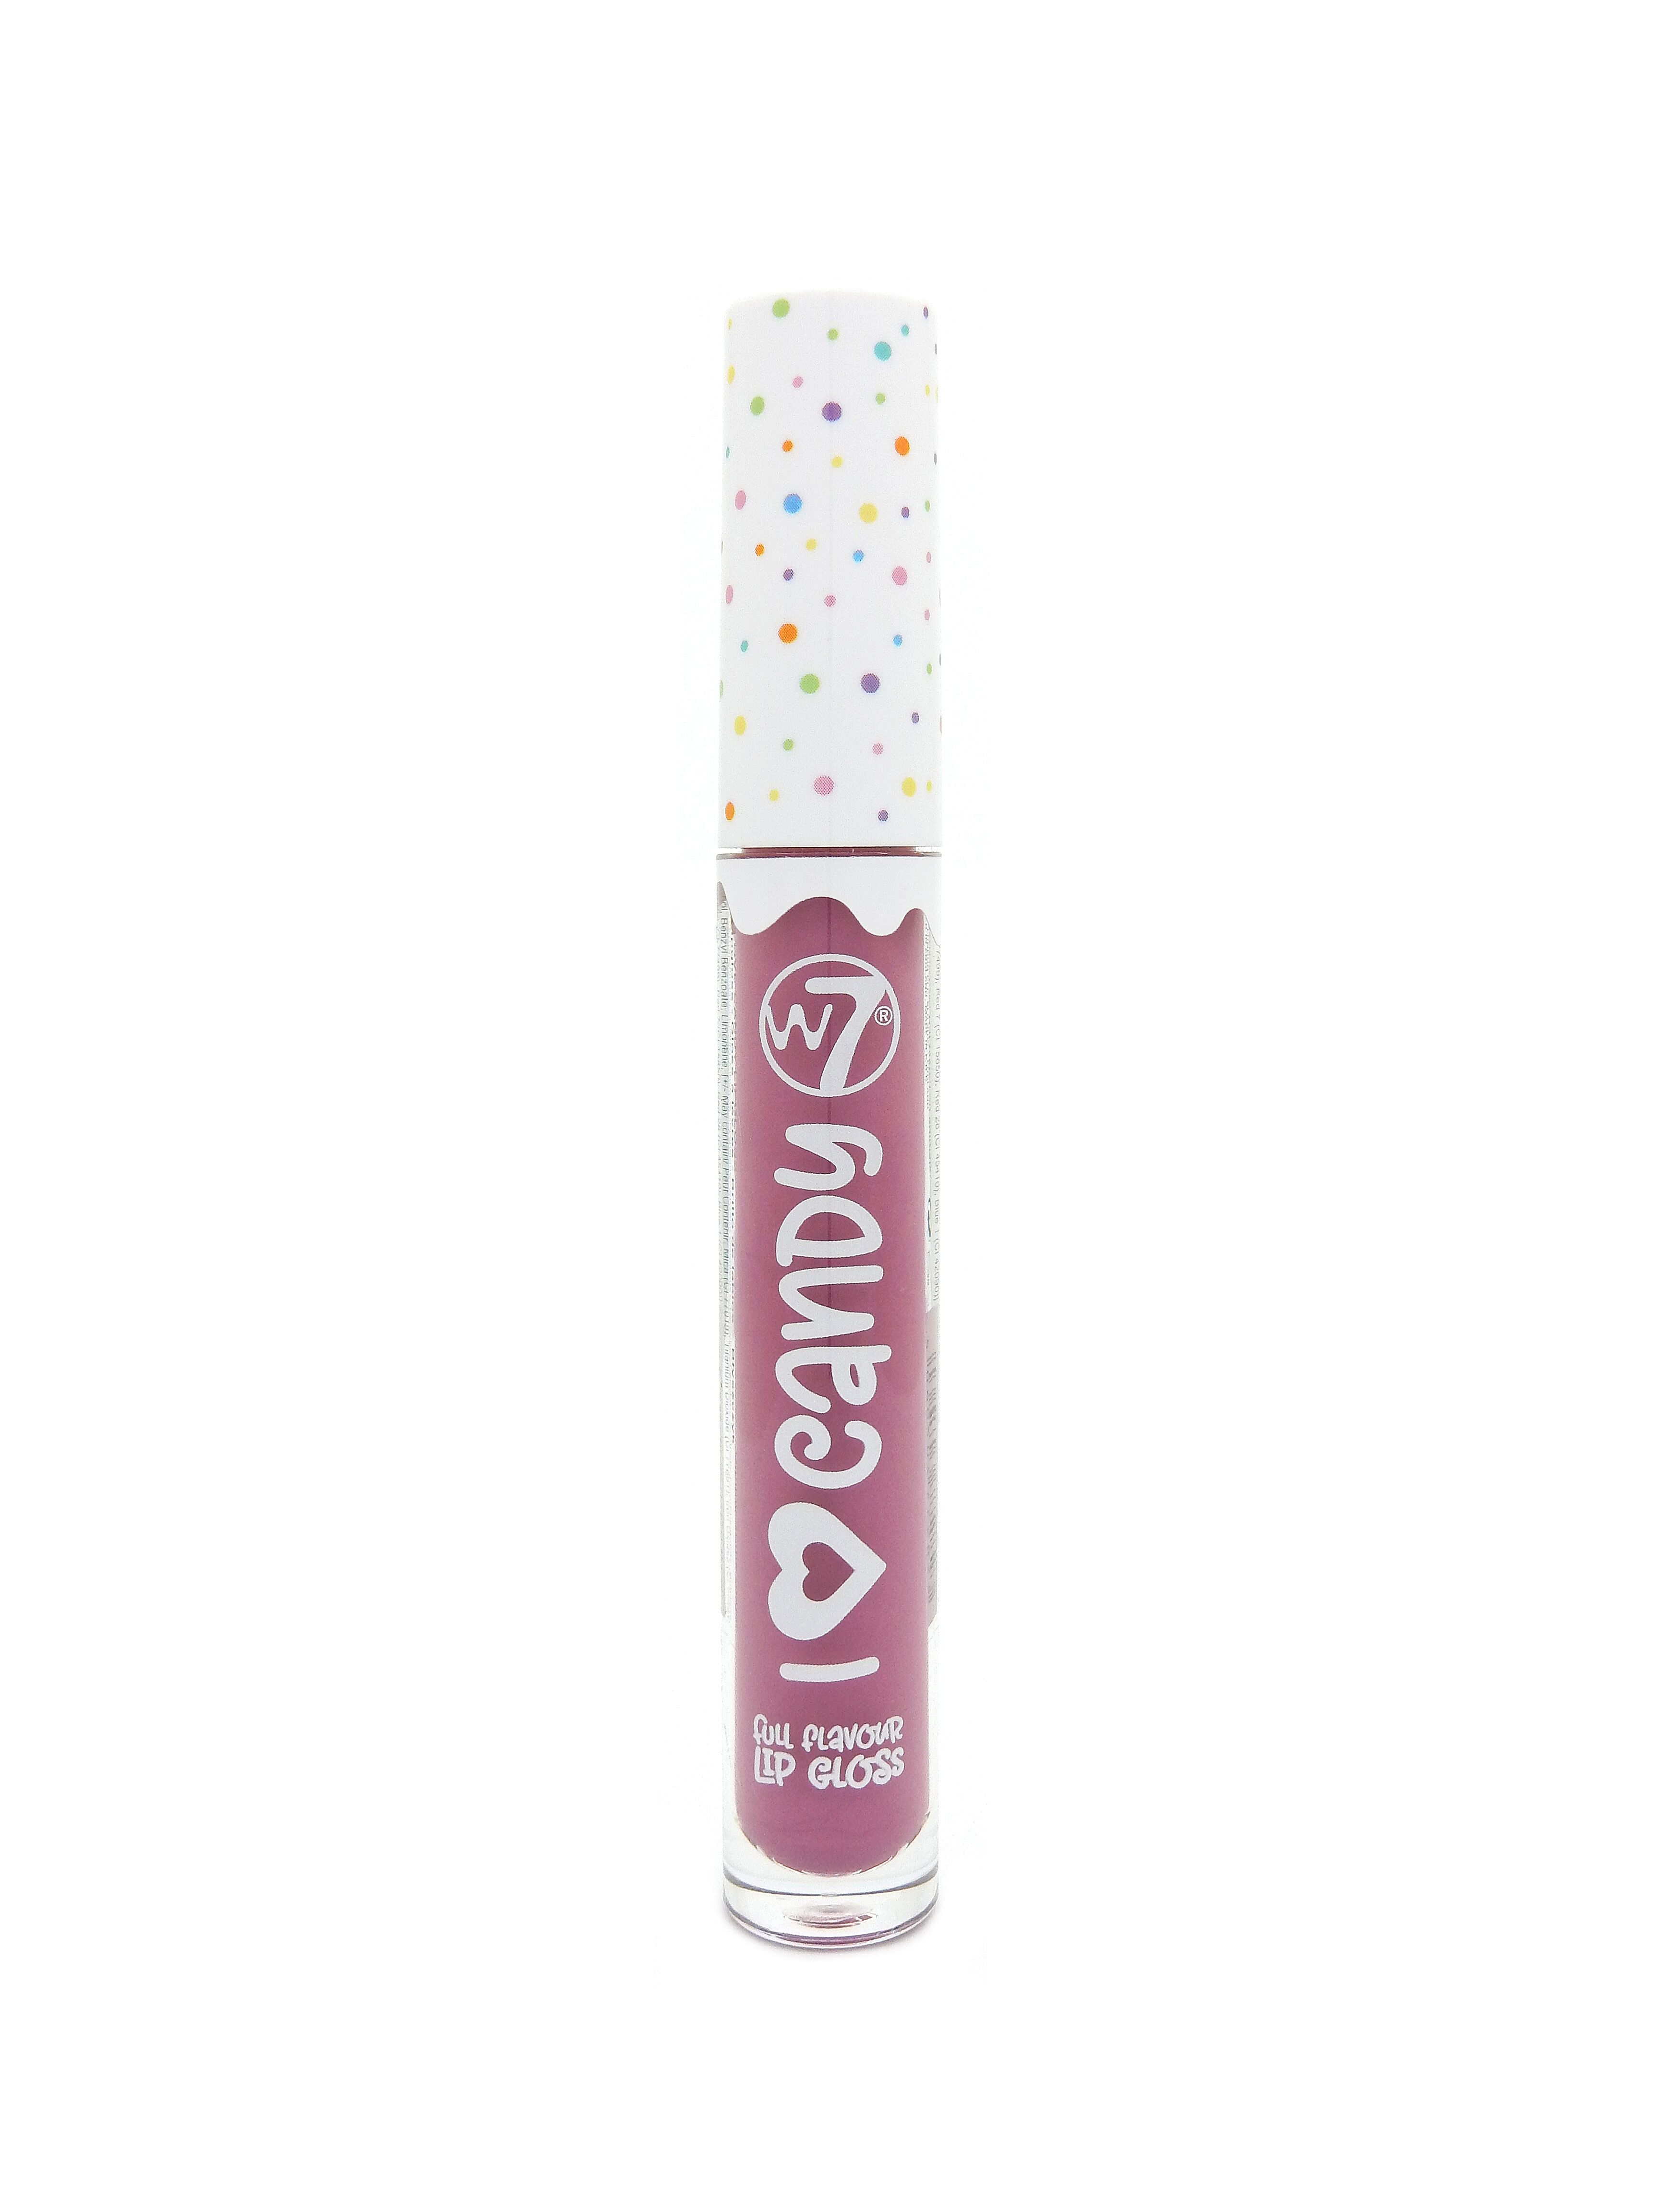 W7 I Love Candy - Gimme Some Suger!  Full Flavour Lip Gloss